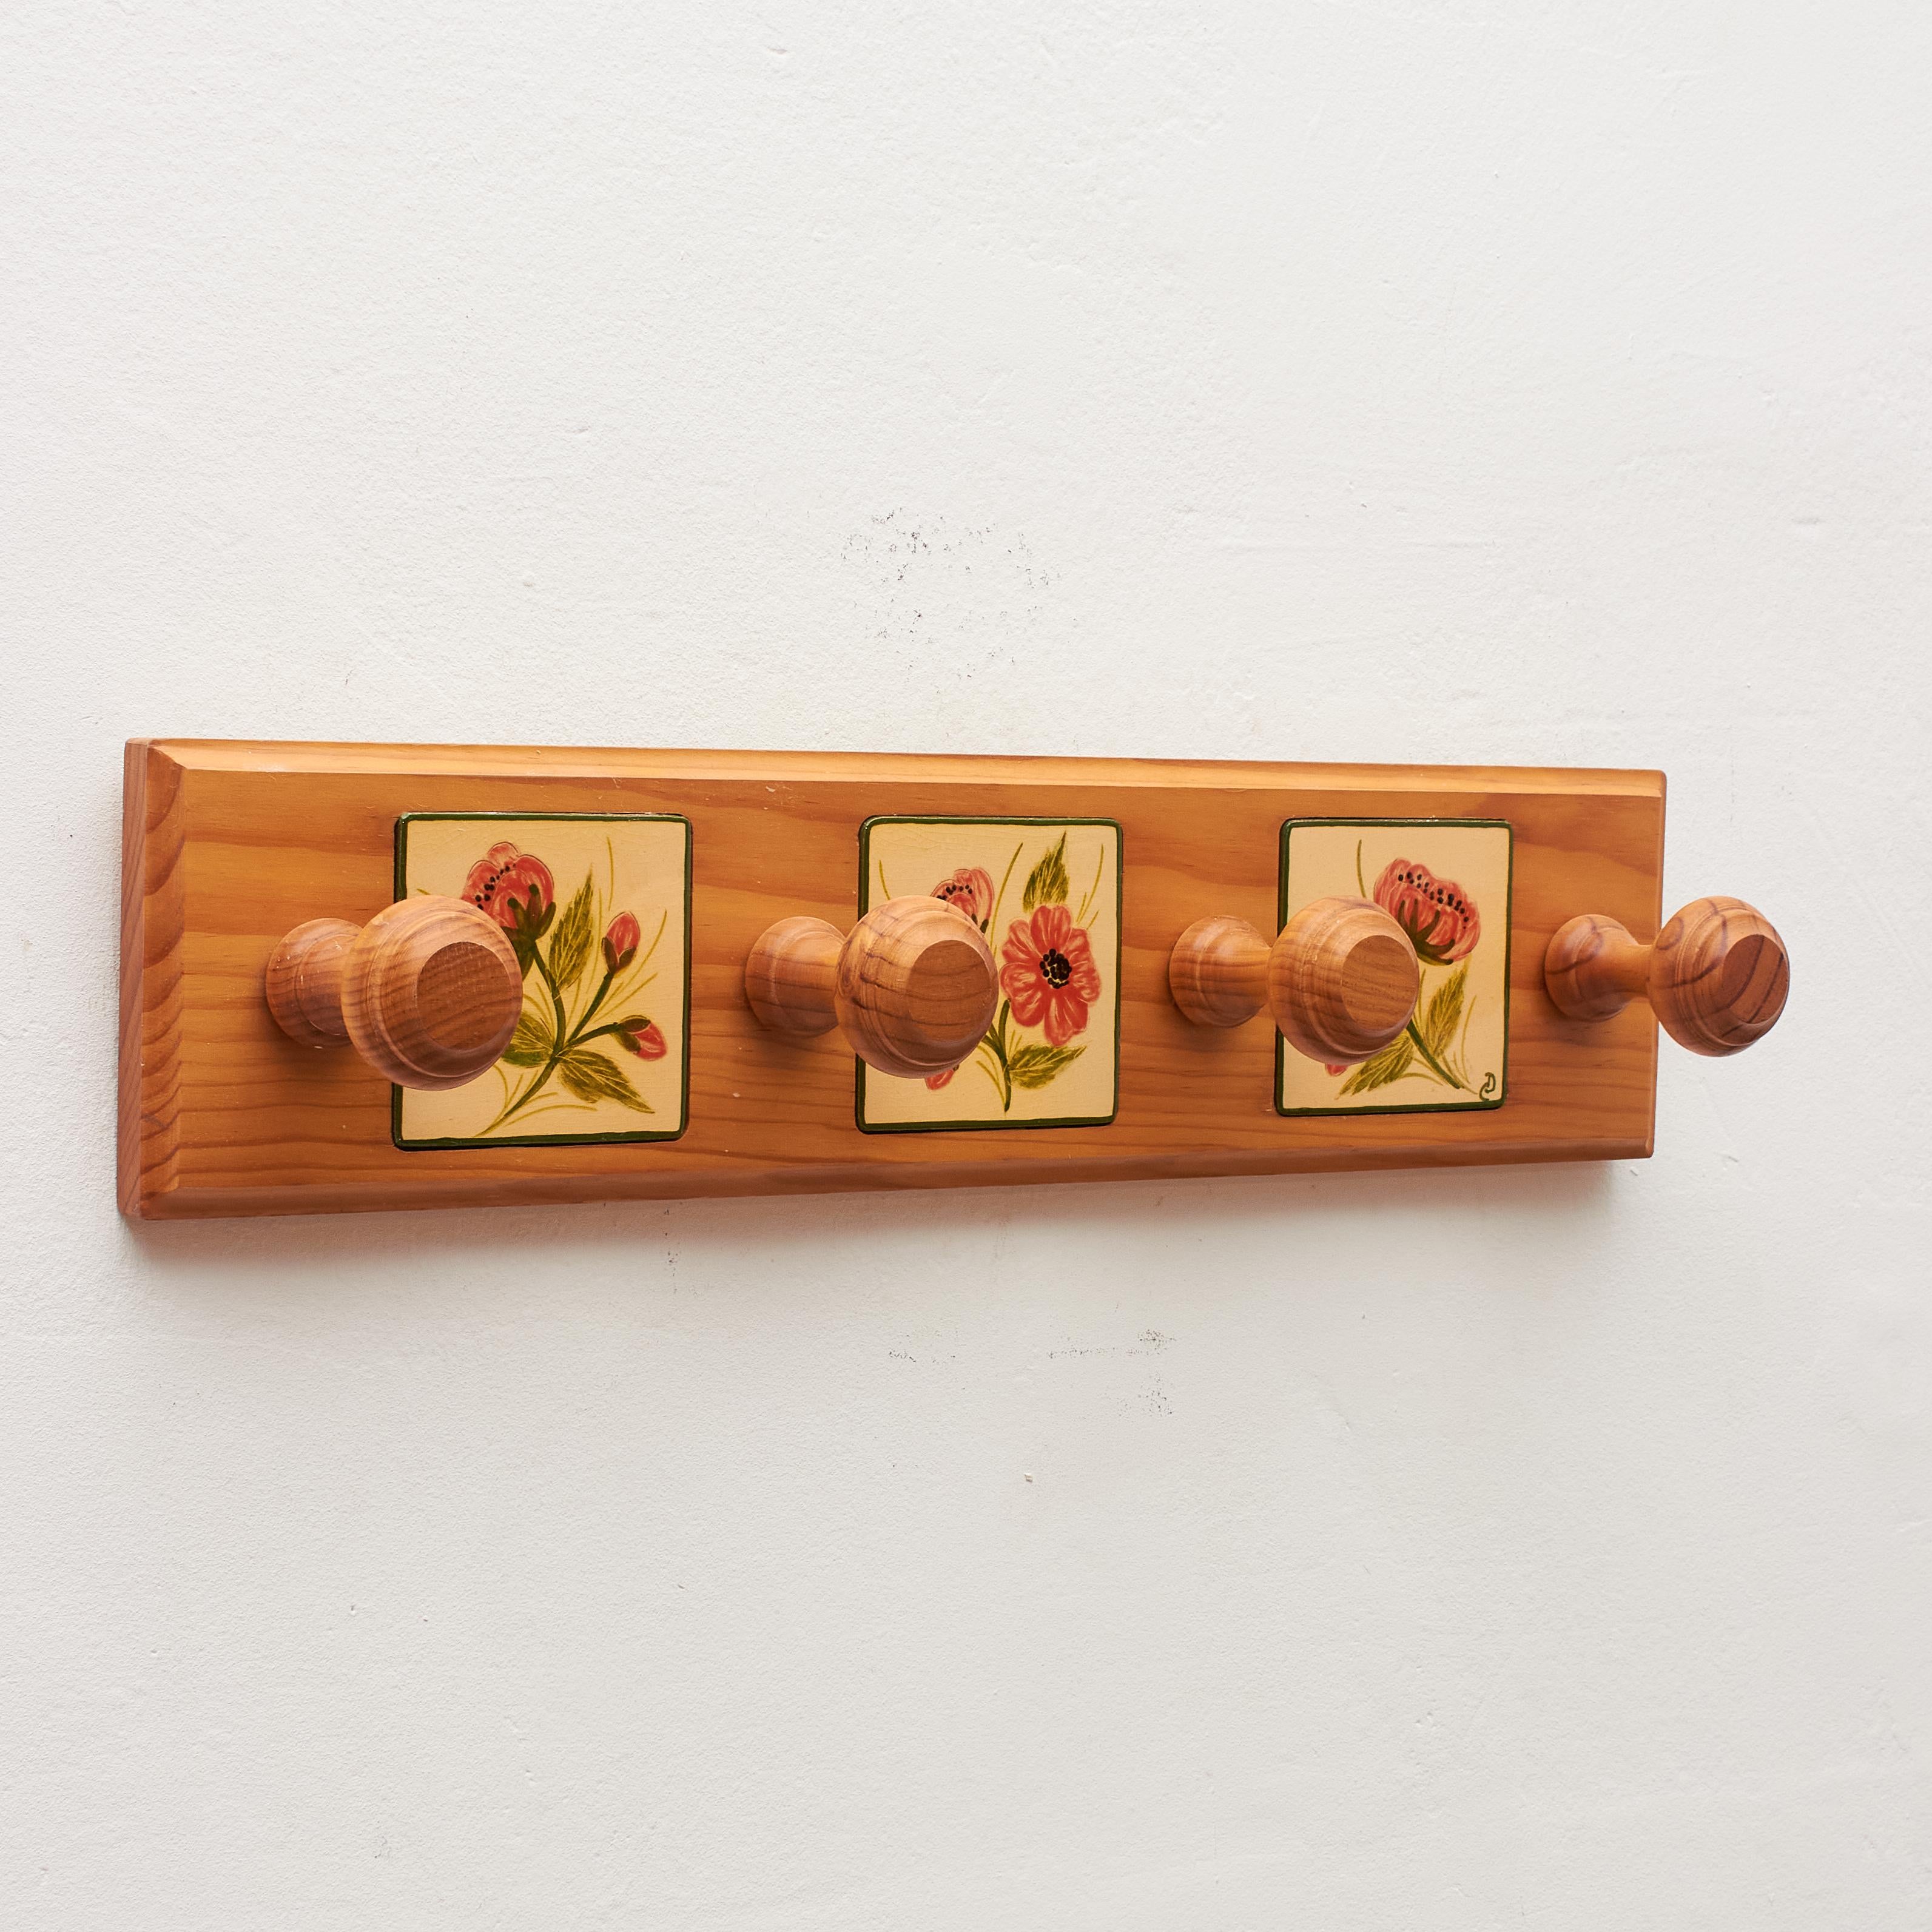 Spanish Diaz Costa Wood and Hand Painted Ceramic Wall Hanger, circa 1960 For Sale